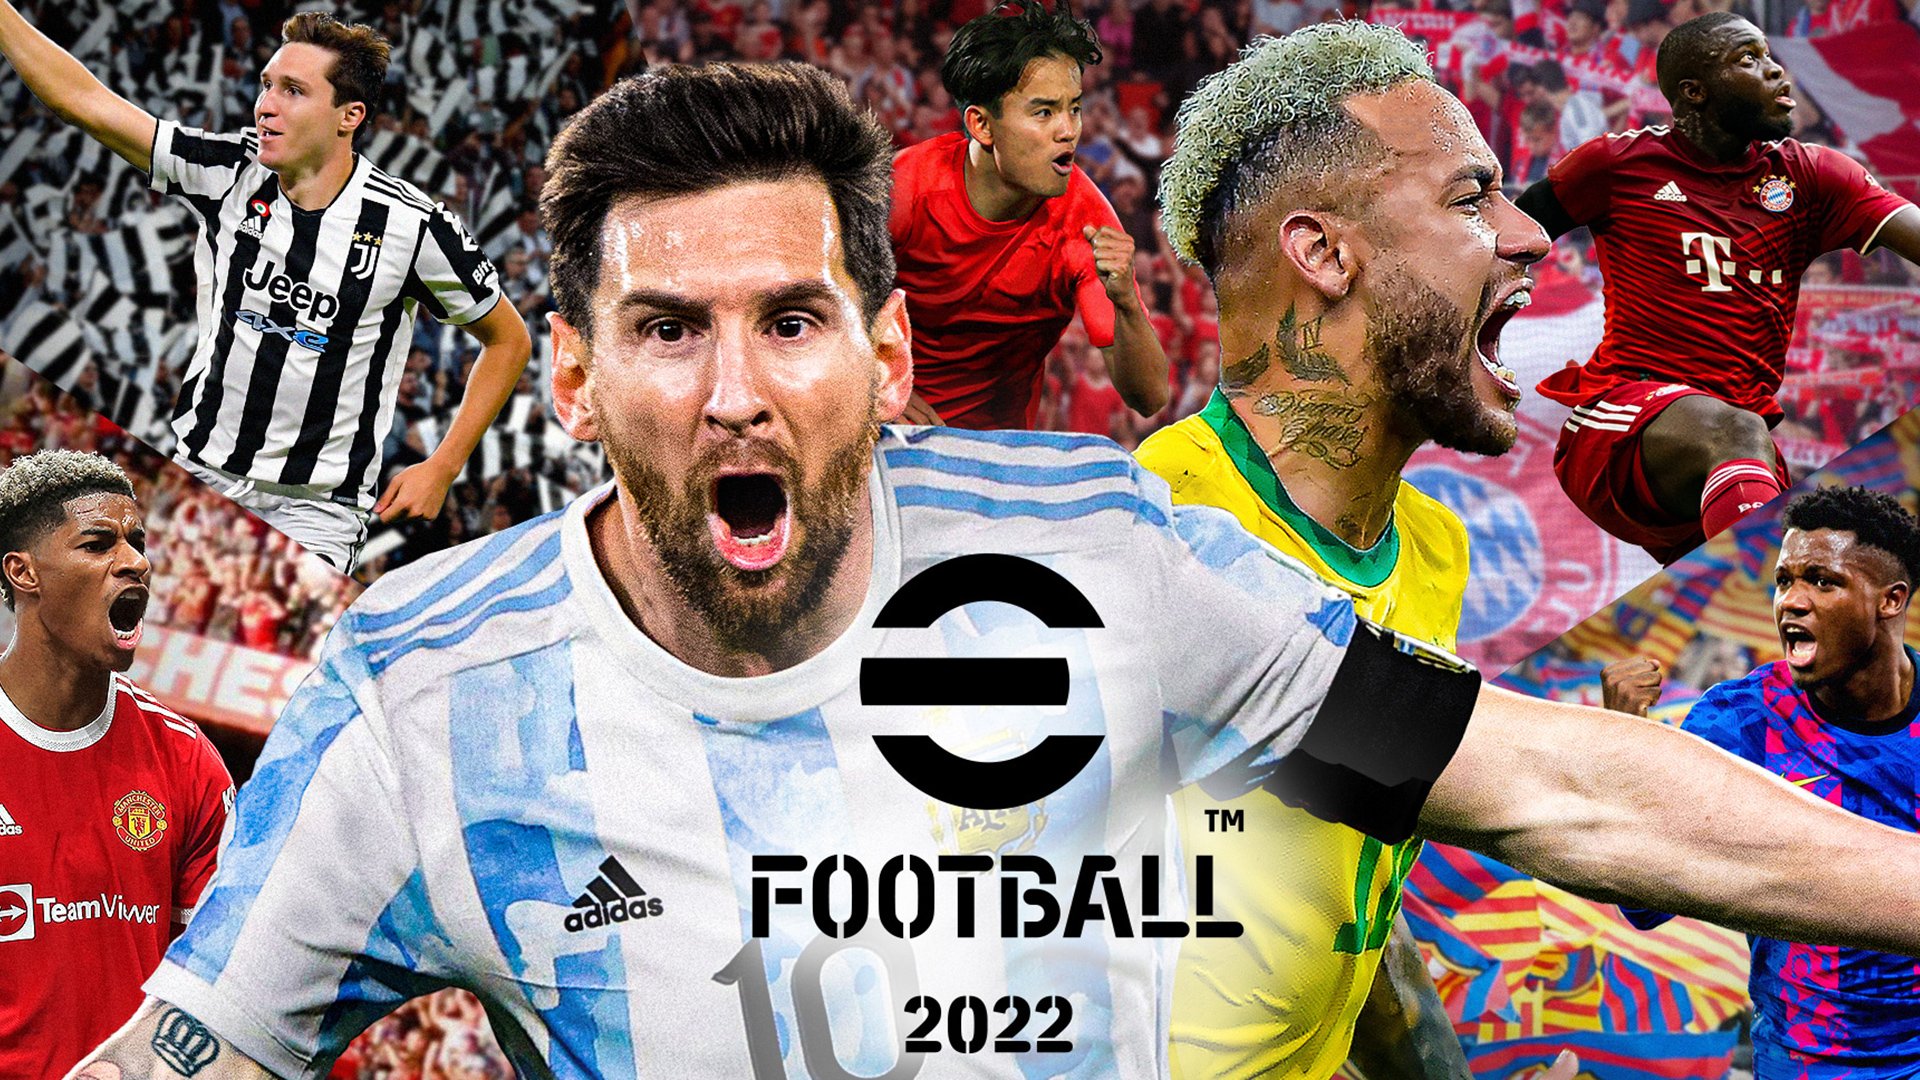 eFootball 2022 1.0 Impressions: Worth Re-Downloading - Operation Sports